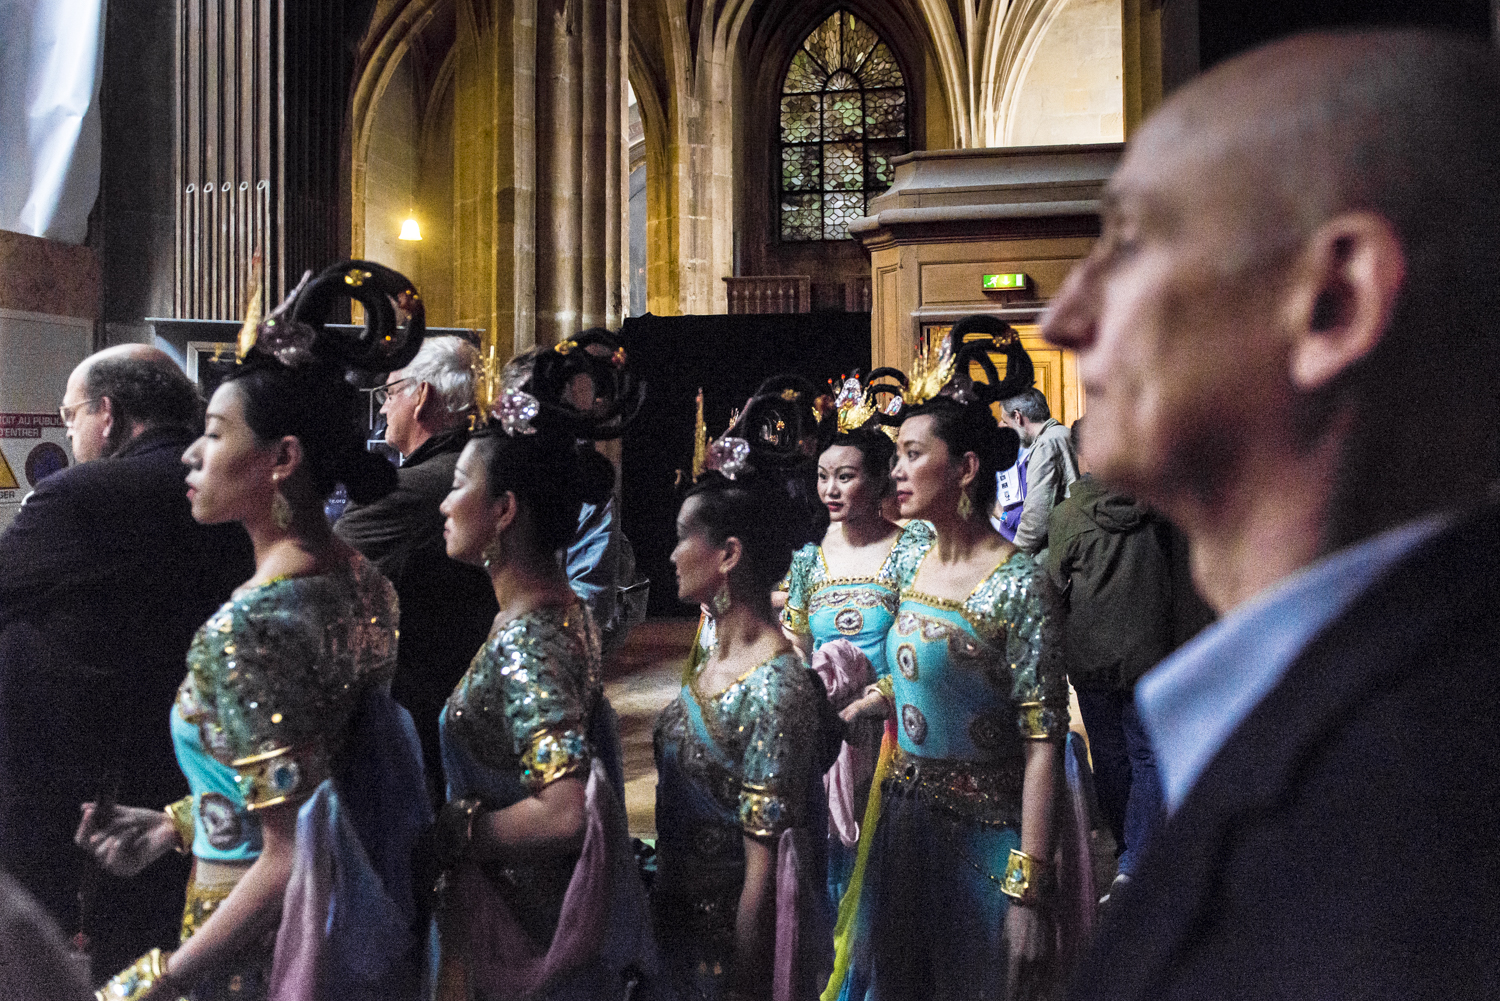 Members of the Fo Guang Shan Temple dance troupe prepare to perform on 29 May 2016 (photo: Jan Schmidt-Whitley)